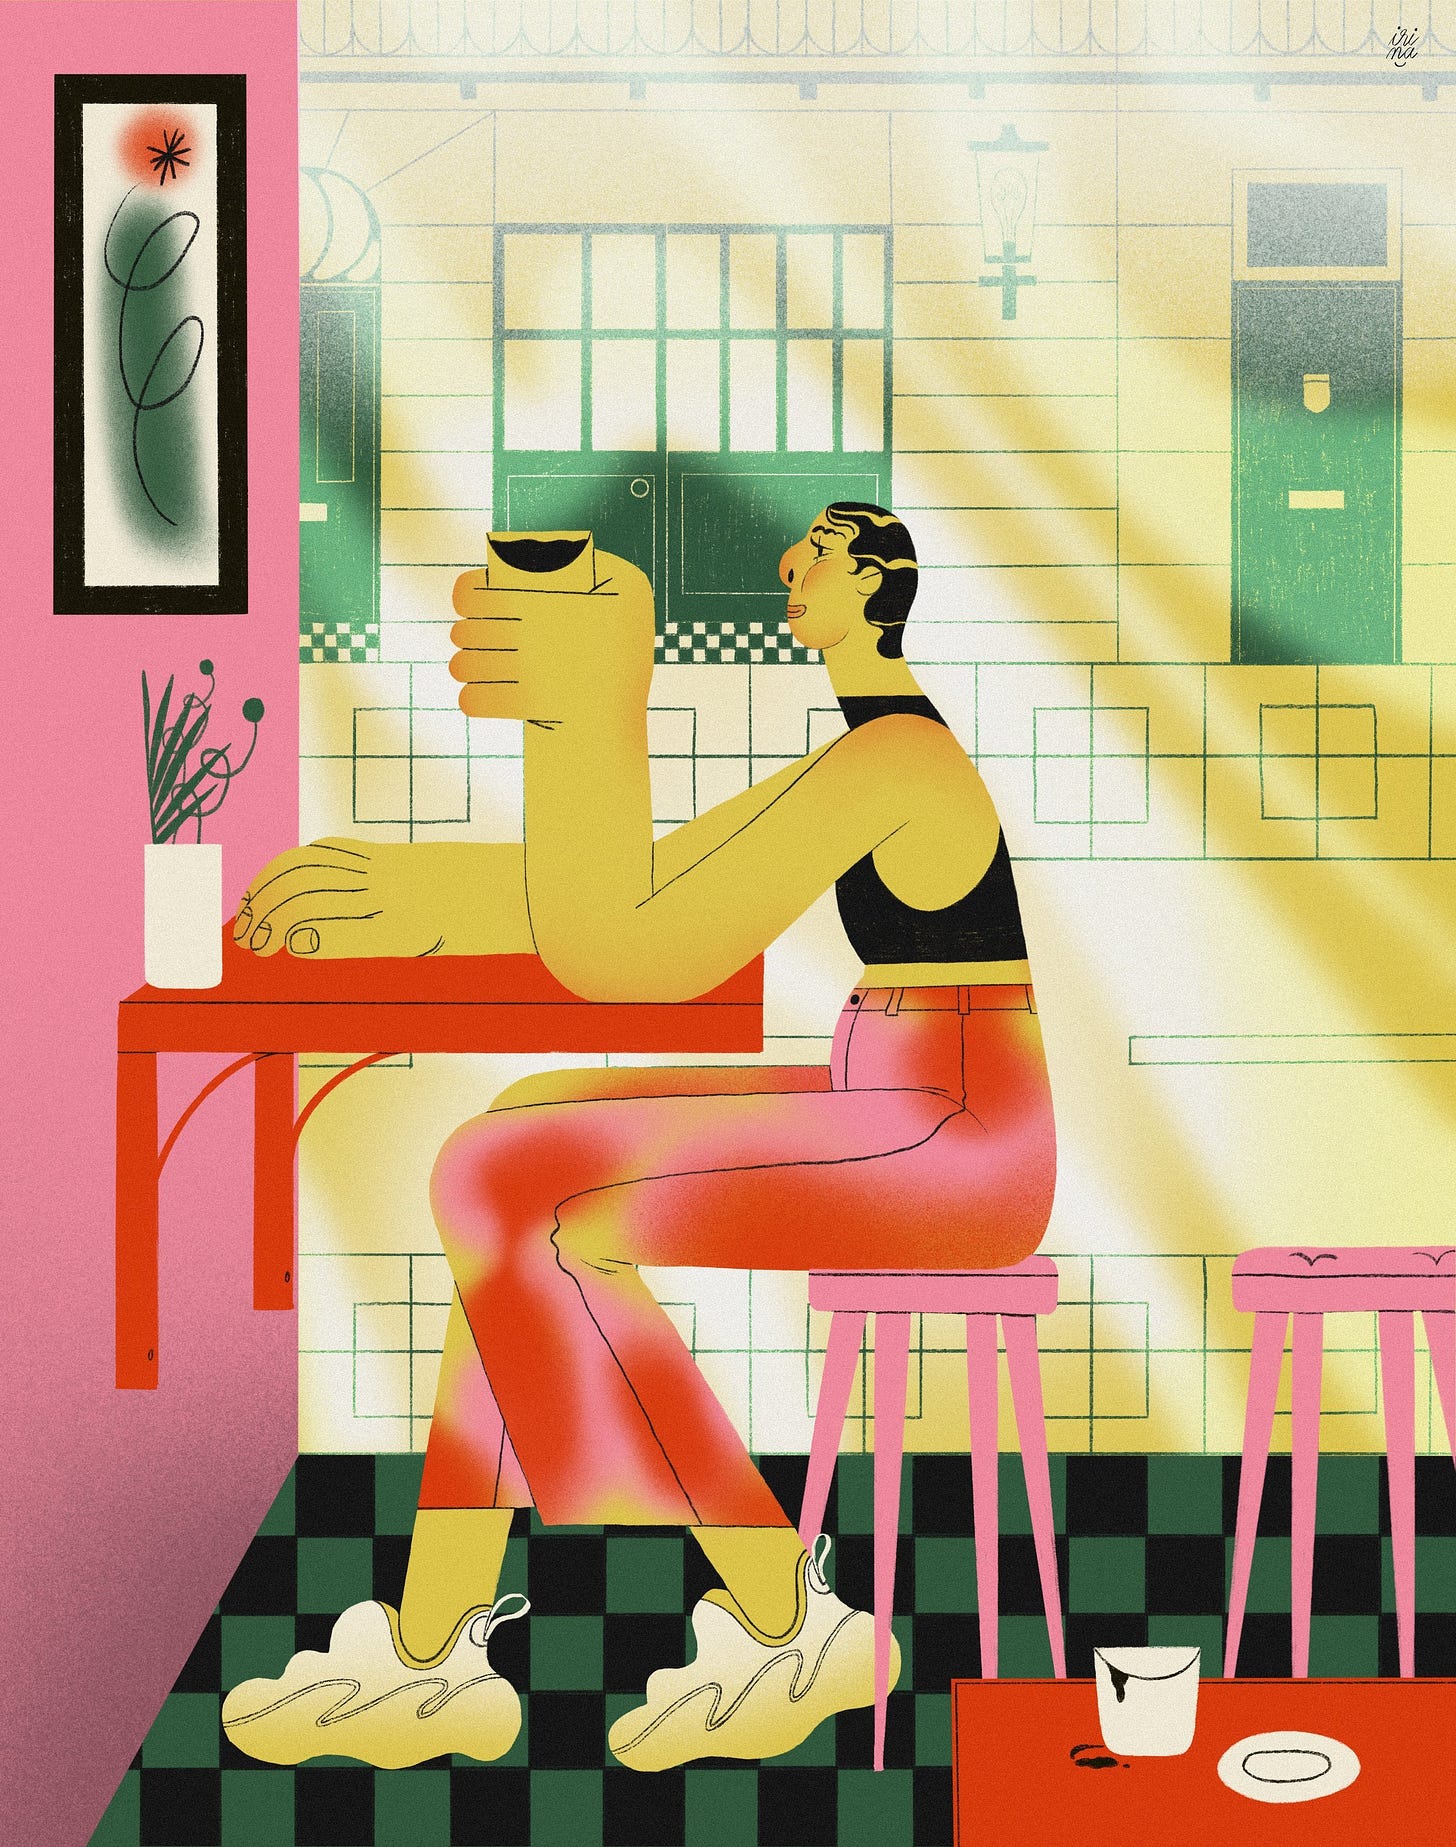 A figure, in profile, sits inside a cafe at a red table on a pink stool and lifts a coffee cup. They have exaggerated limbs and hands. The floor is chequered and the background is a flattened, angular view of the street outside as if seen through a floor-to-ceiling window.